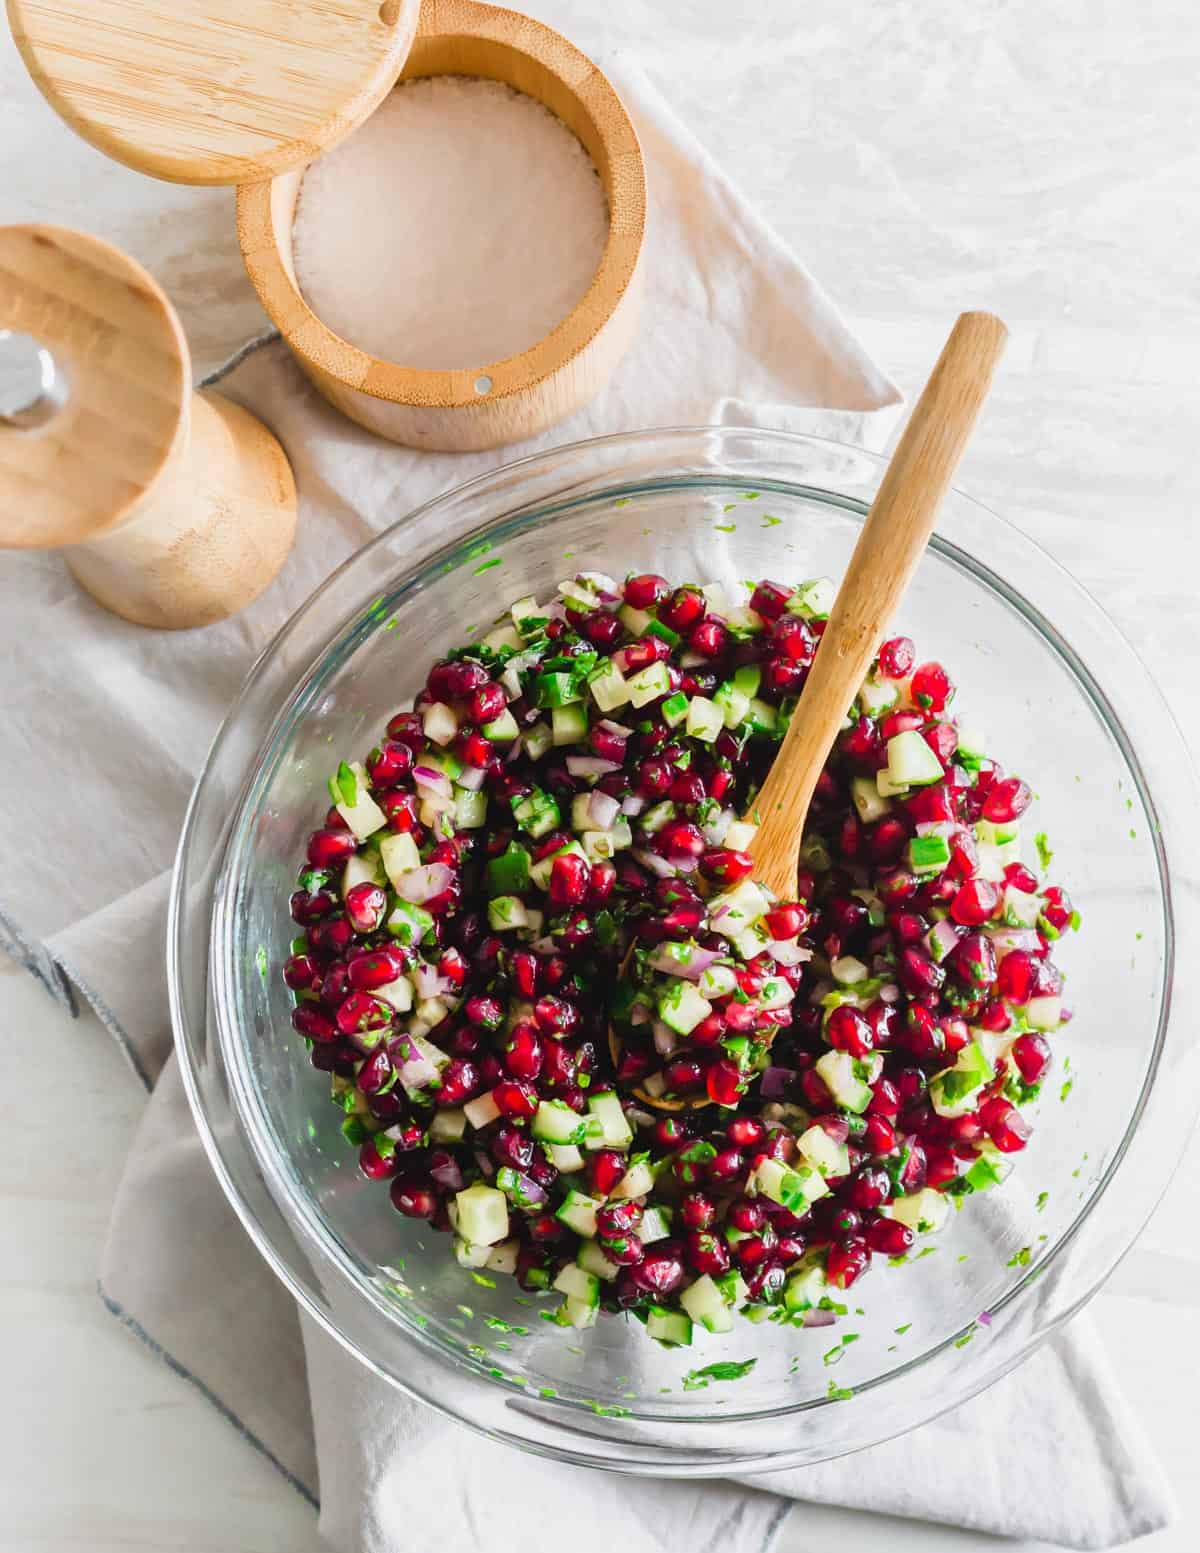 Mixing ingredients together to make pomegranate salsa in a glass bowl.